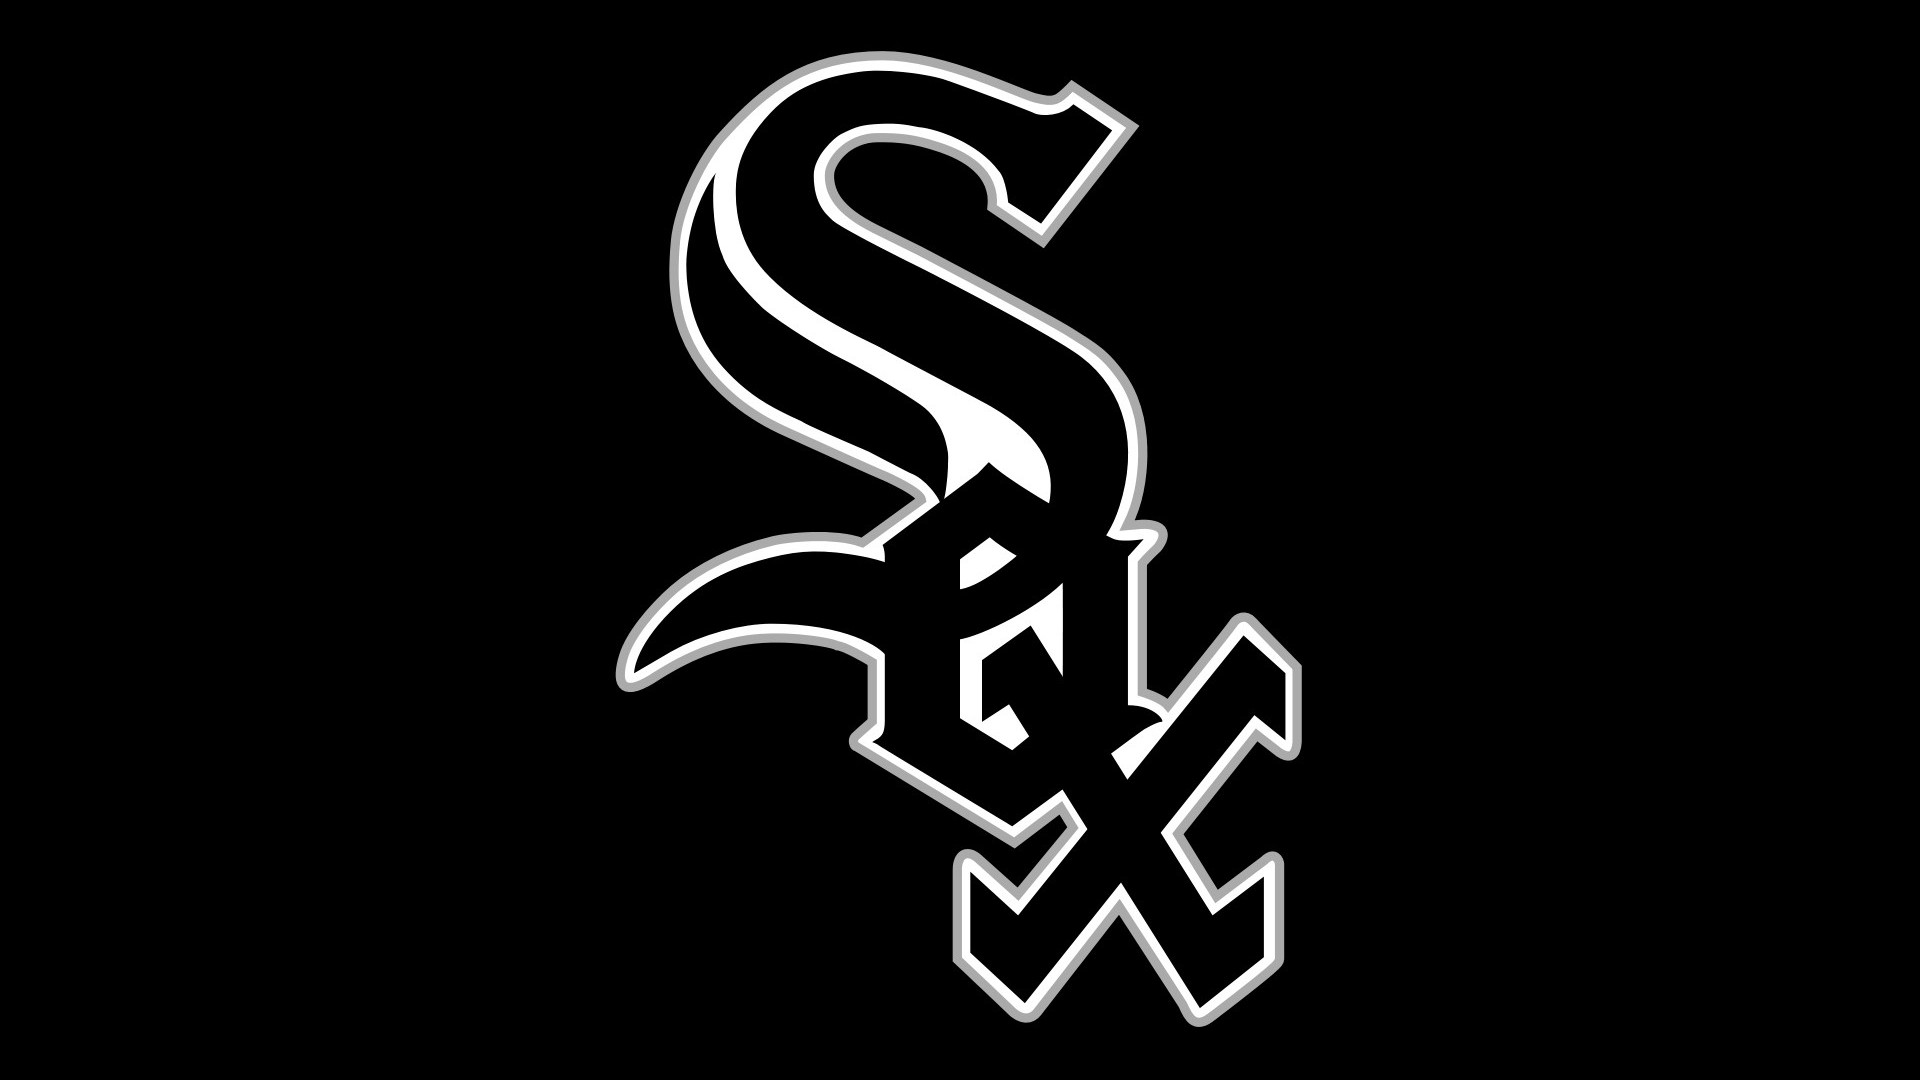 HD Chicago White Sox Wallpapers with high-resolution 1920x1080 pixel. You can use this wallpaper for Mac Desktop Wallpaper, Laptop Screensavers, Android Wallpapers, Tablet or iPhone Home Screen and another mobile phone device